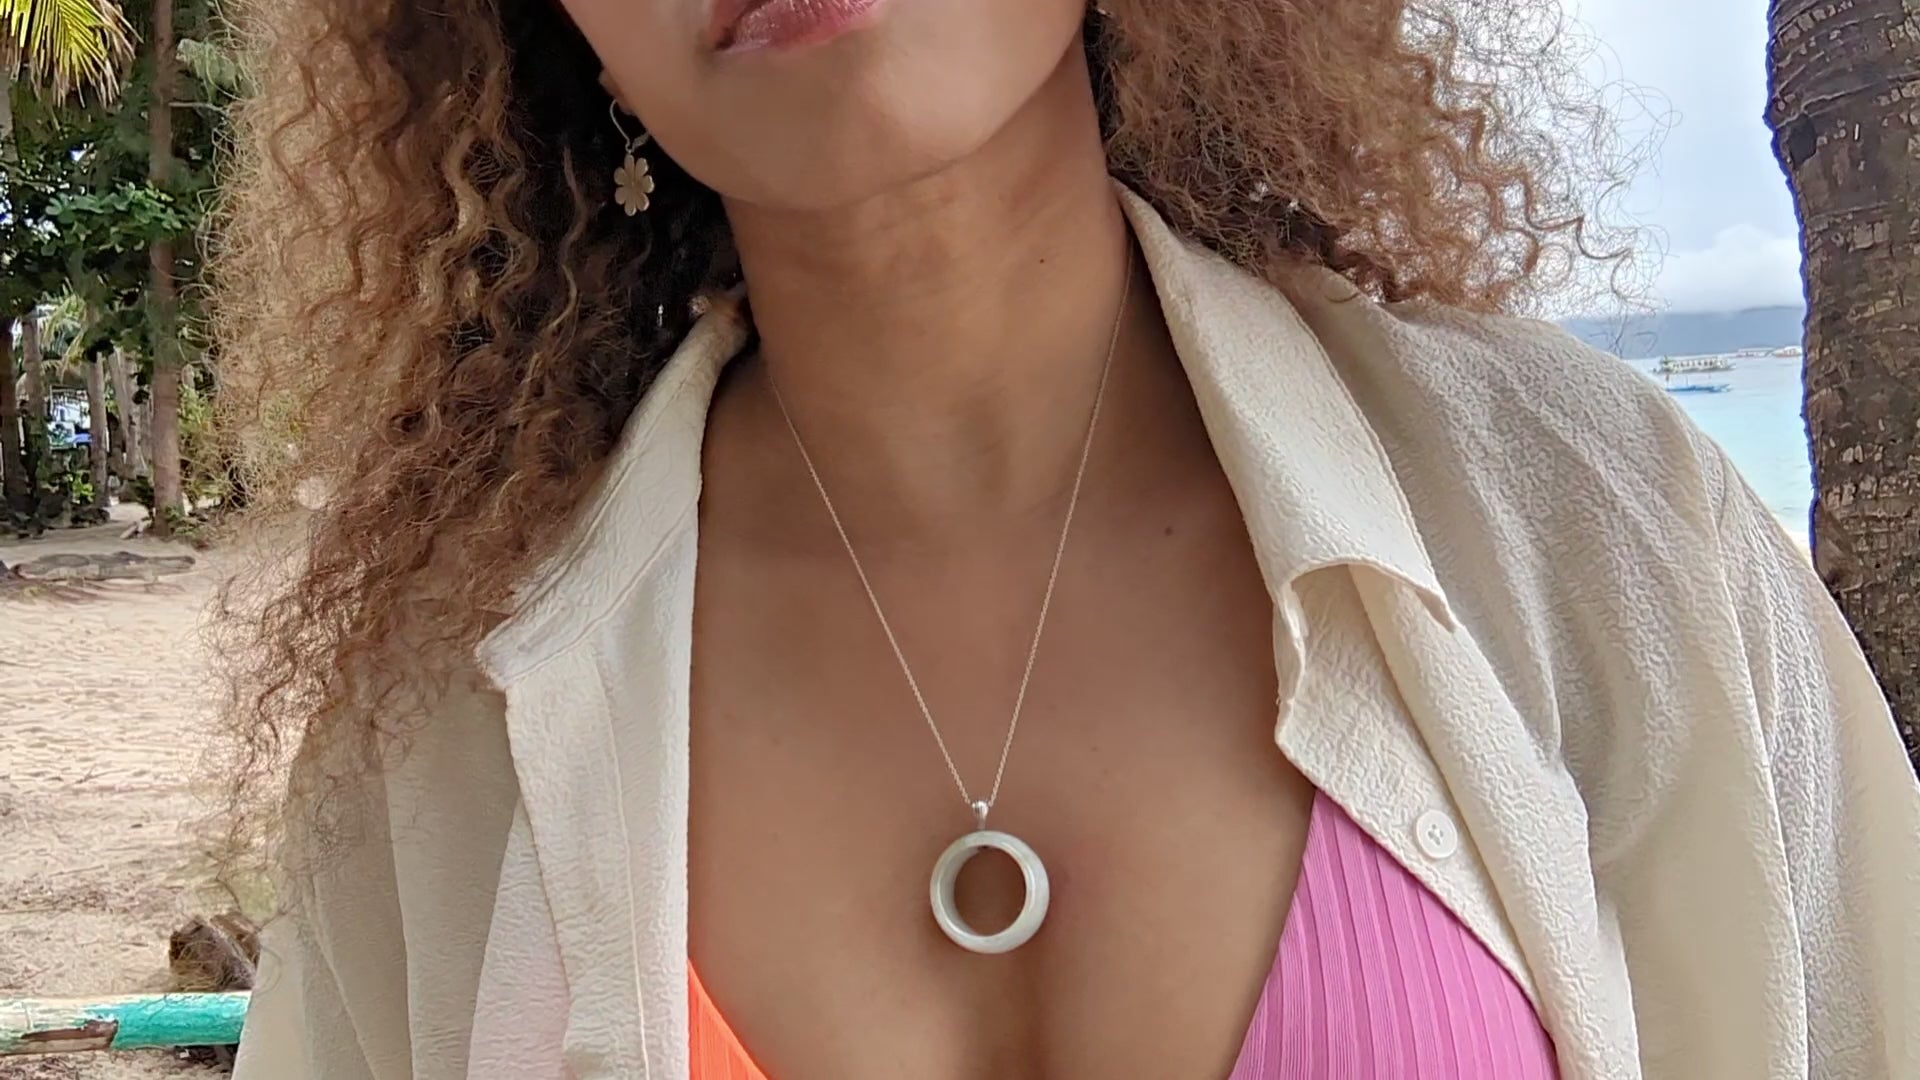 video of woman at beach in a white blouse and pink and orange bikini wearing a white jade necklace from the wandering jewel